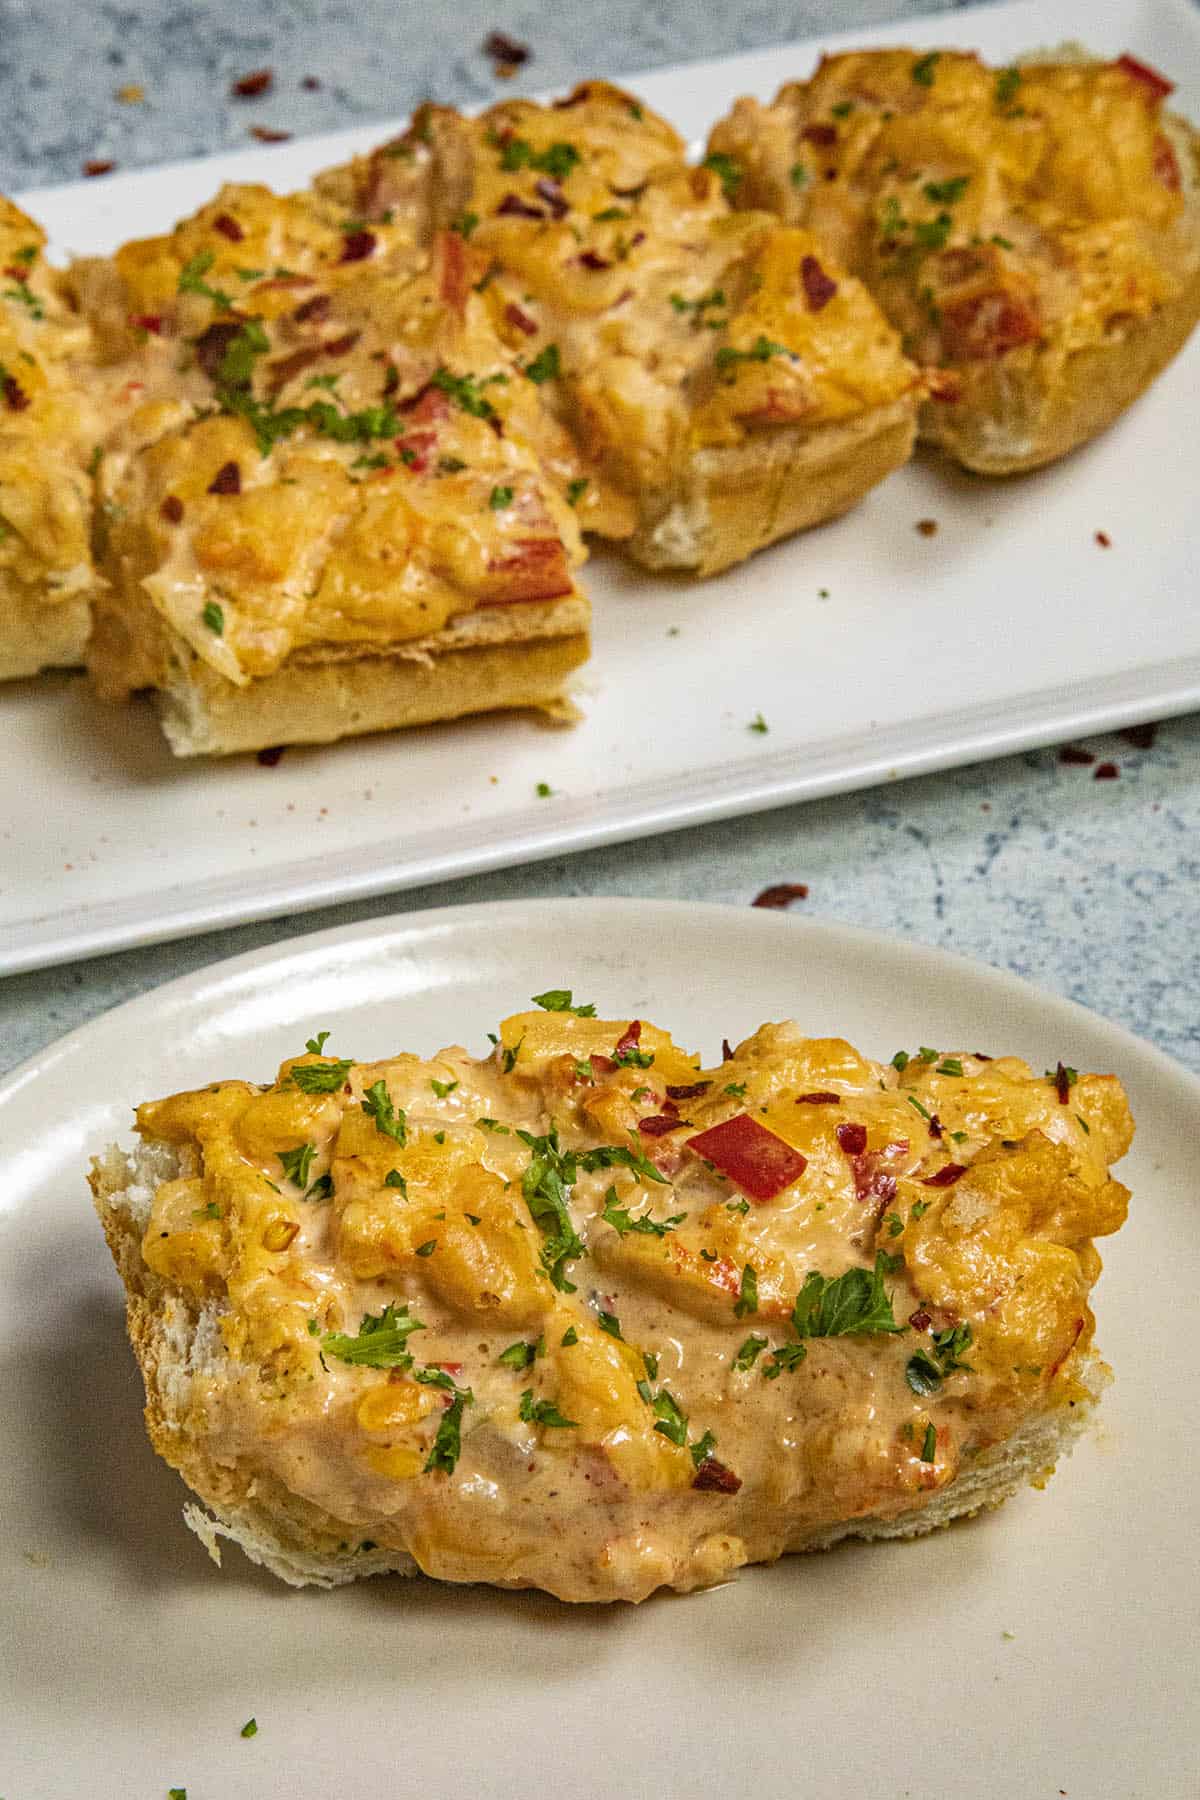 A piece of Crawfish Bread on a plate